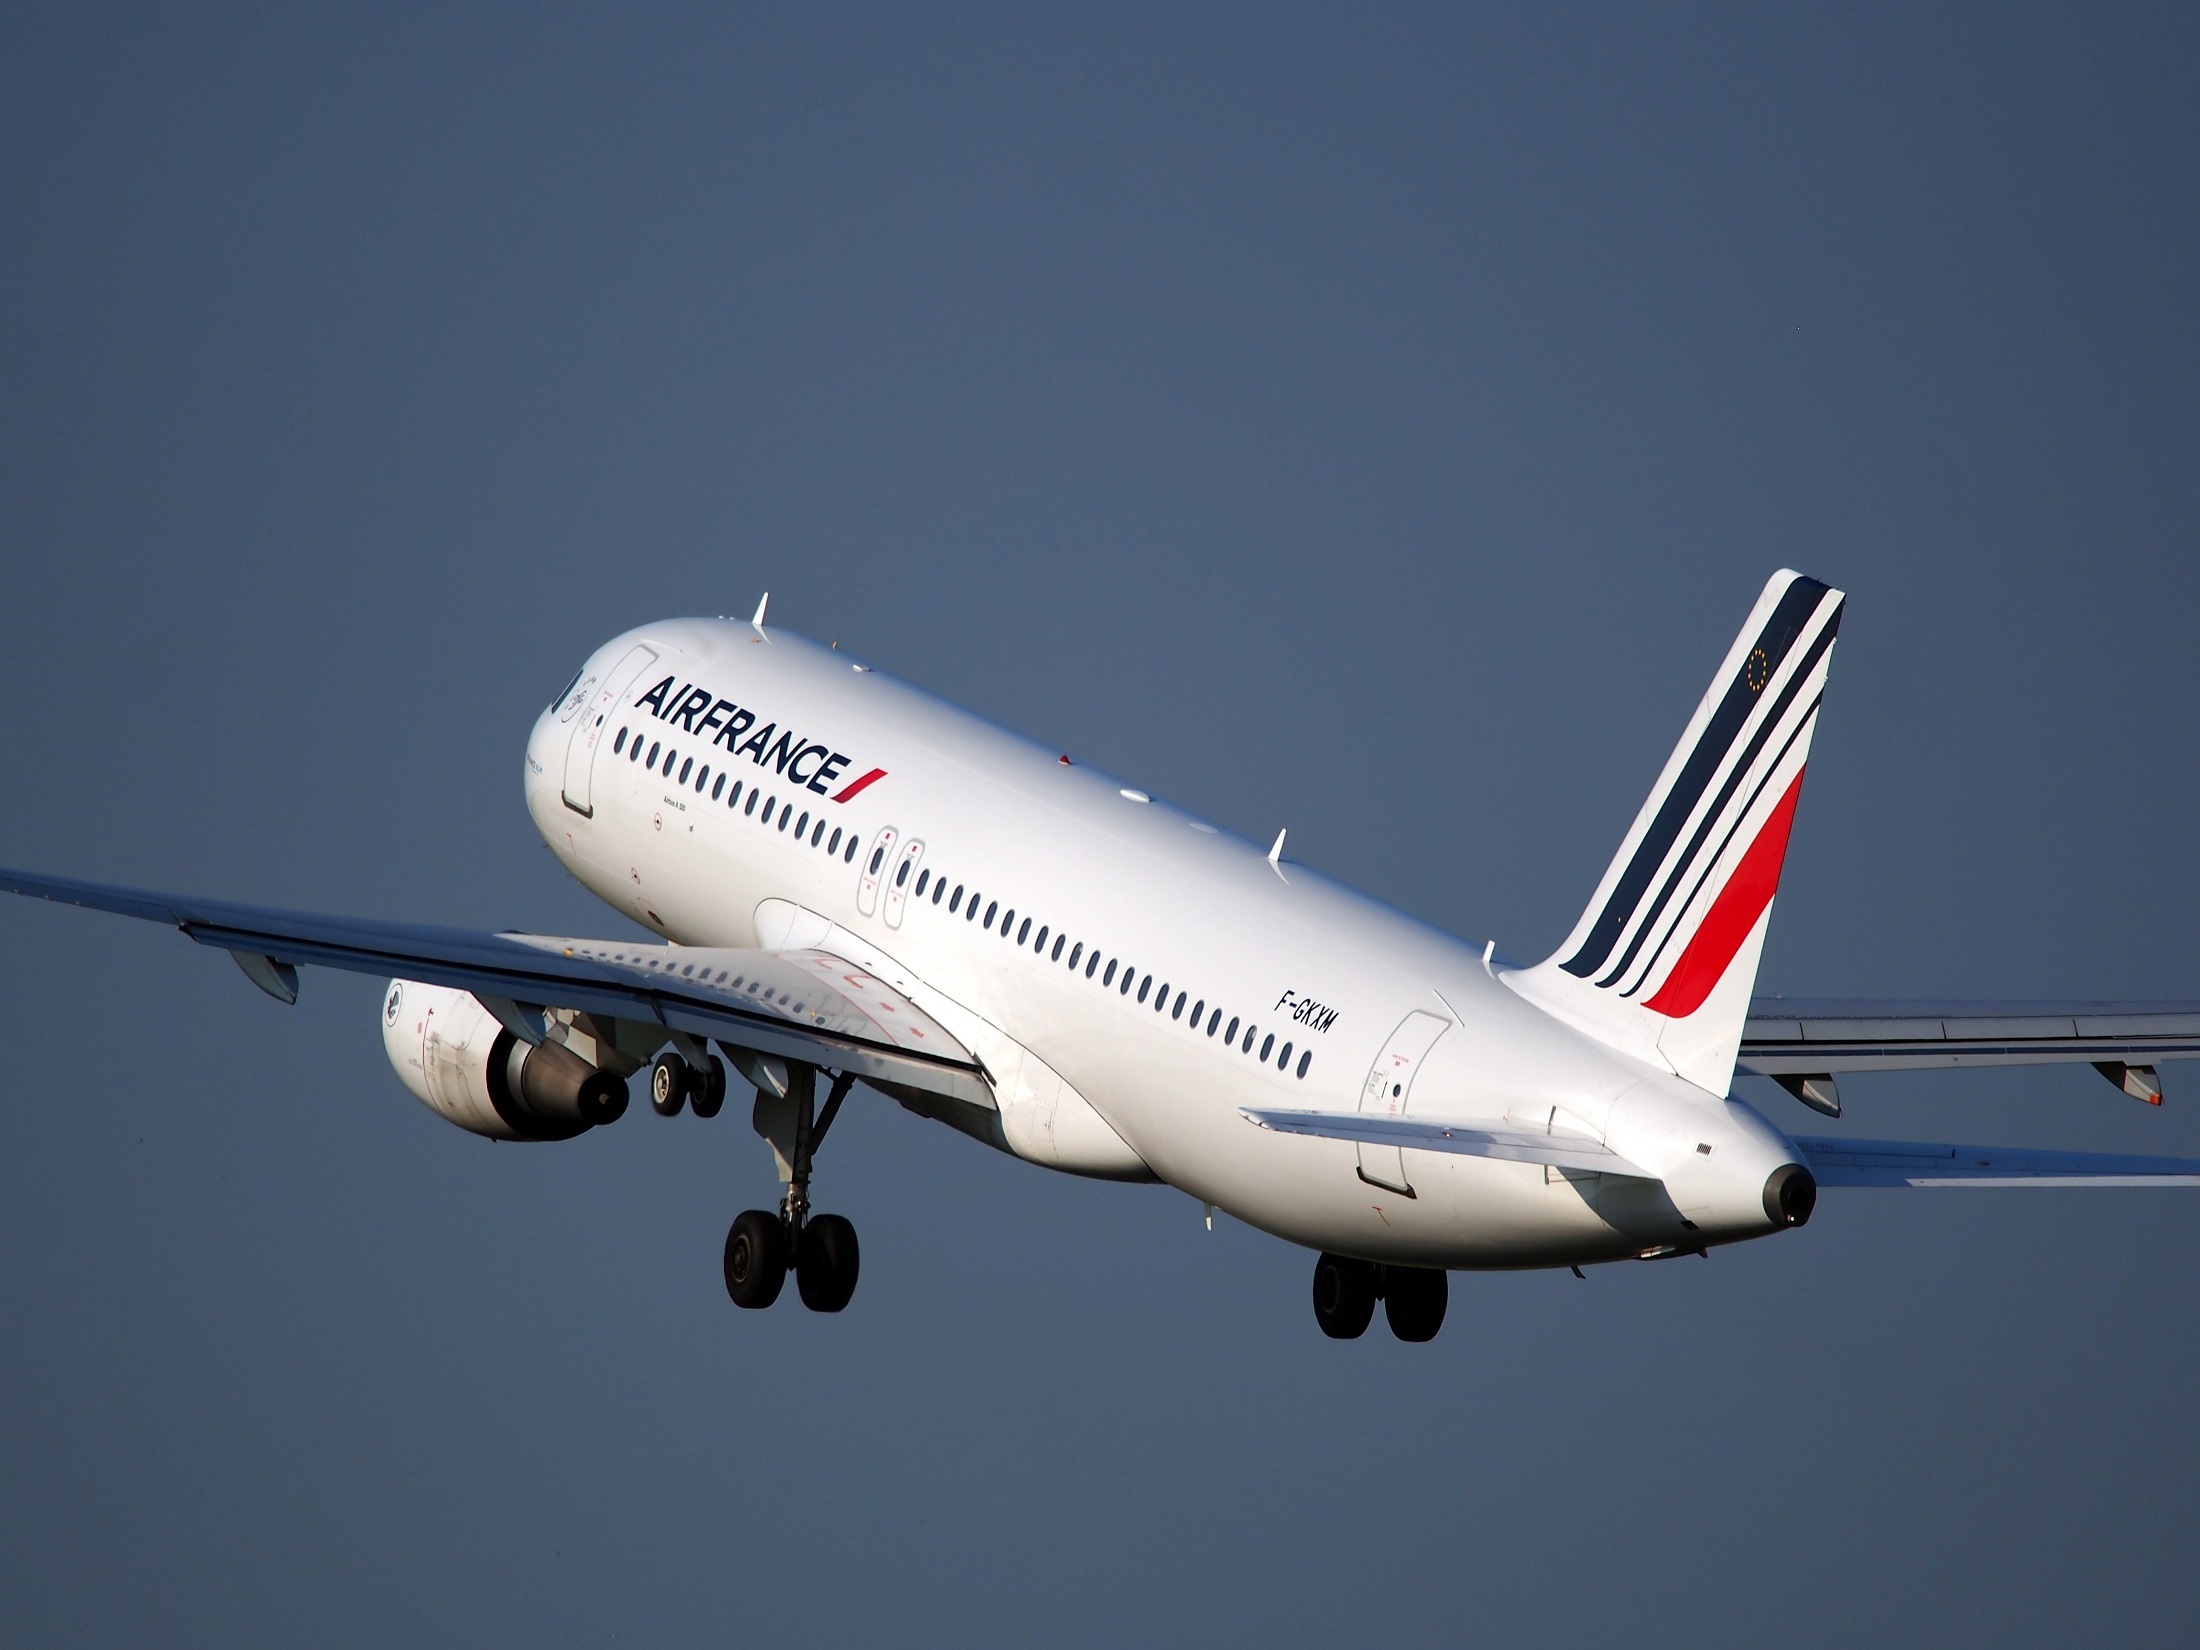 Air France F-GKXY, Airbus A320-214 taking off